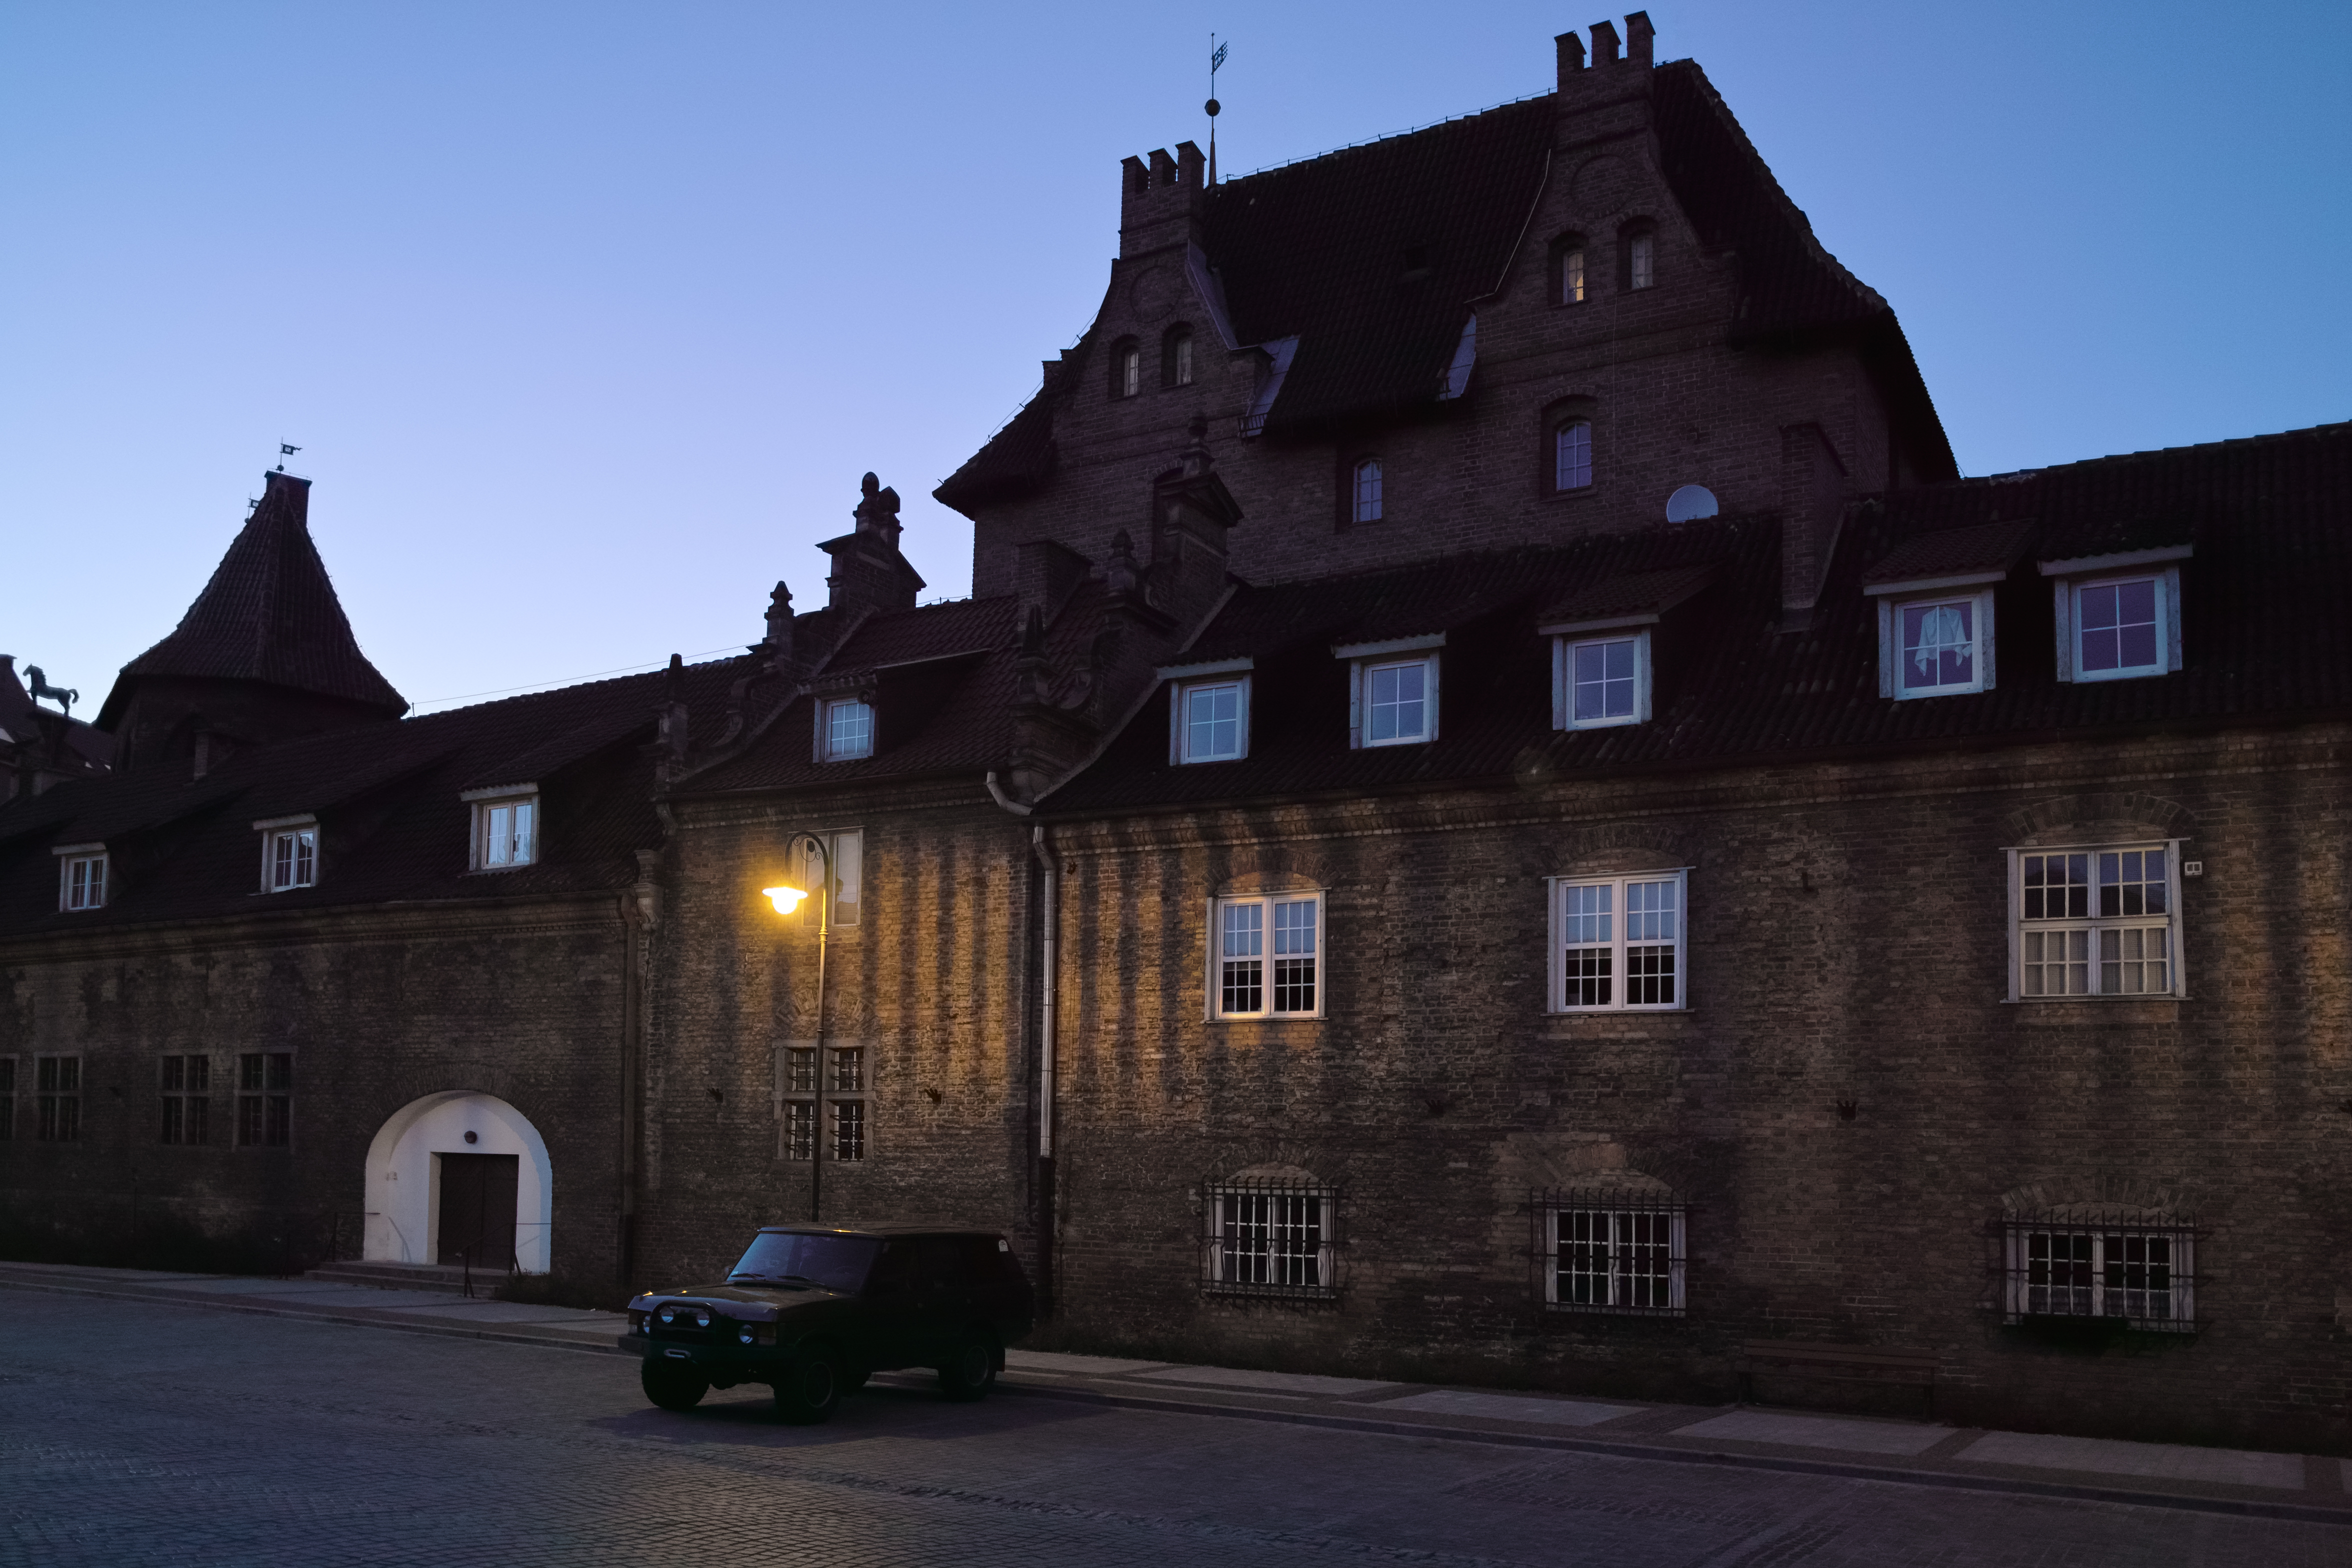 Majestic estate in dusk with car parked under a street light | Source: Shutterstock